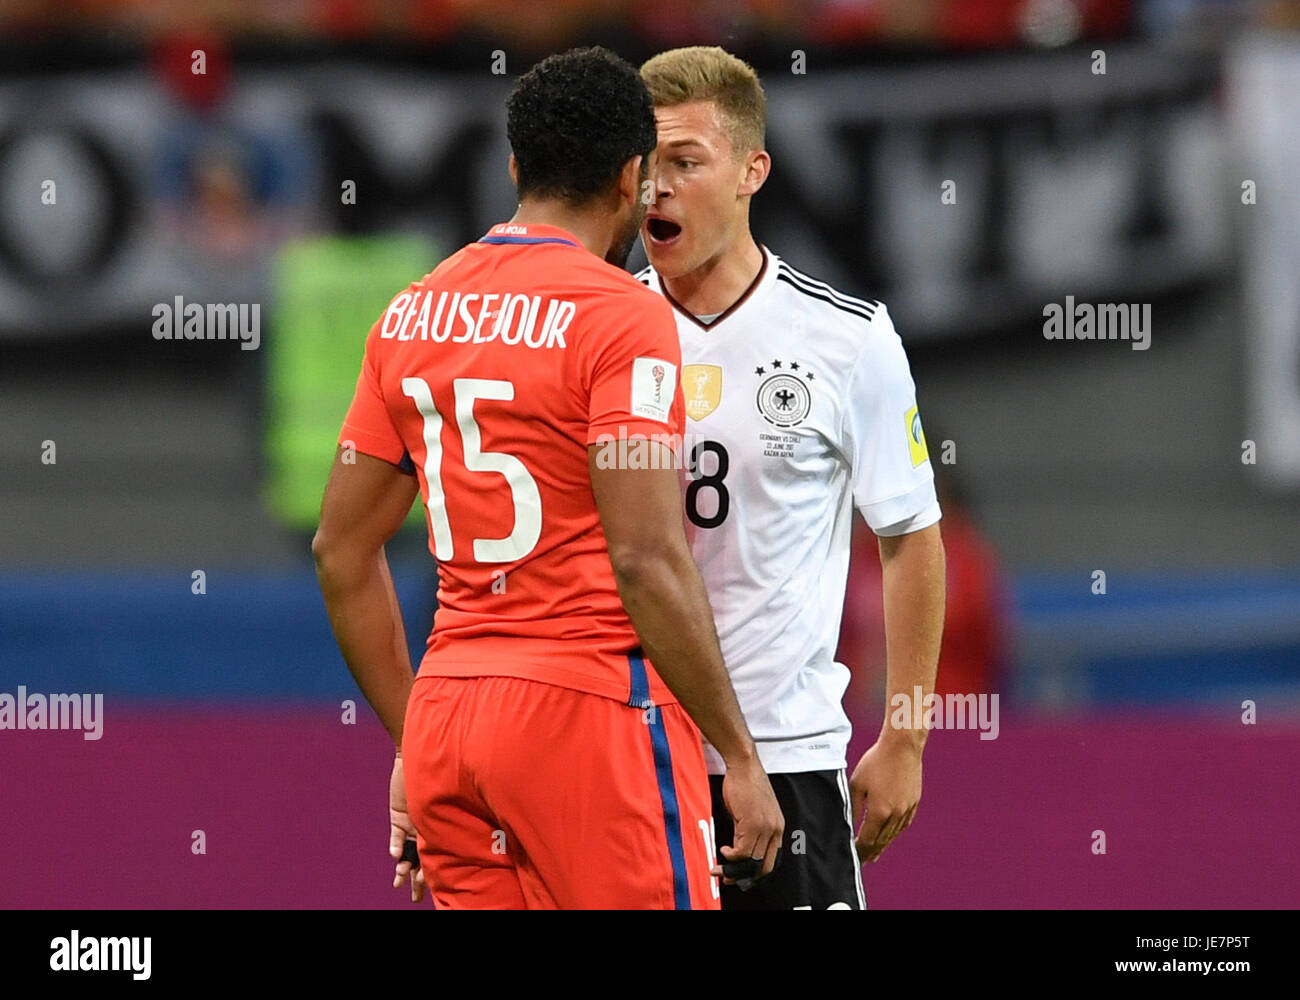 Kazan, Russia. 22nd June, 2017. Germany's Joshua Kimmich (R) and Chile's Jean Beausejour argue on the pitch during the Group B preliminary stage soccer match between Chile and Germany at the Confederations Cup in Kazan, Russia, 22 June 2017. Photo: Marius Becker/dpa/Alamy Live News Stock Photo